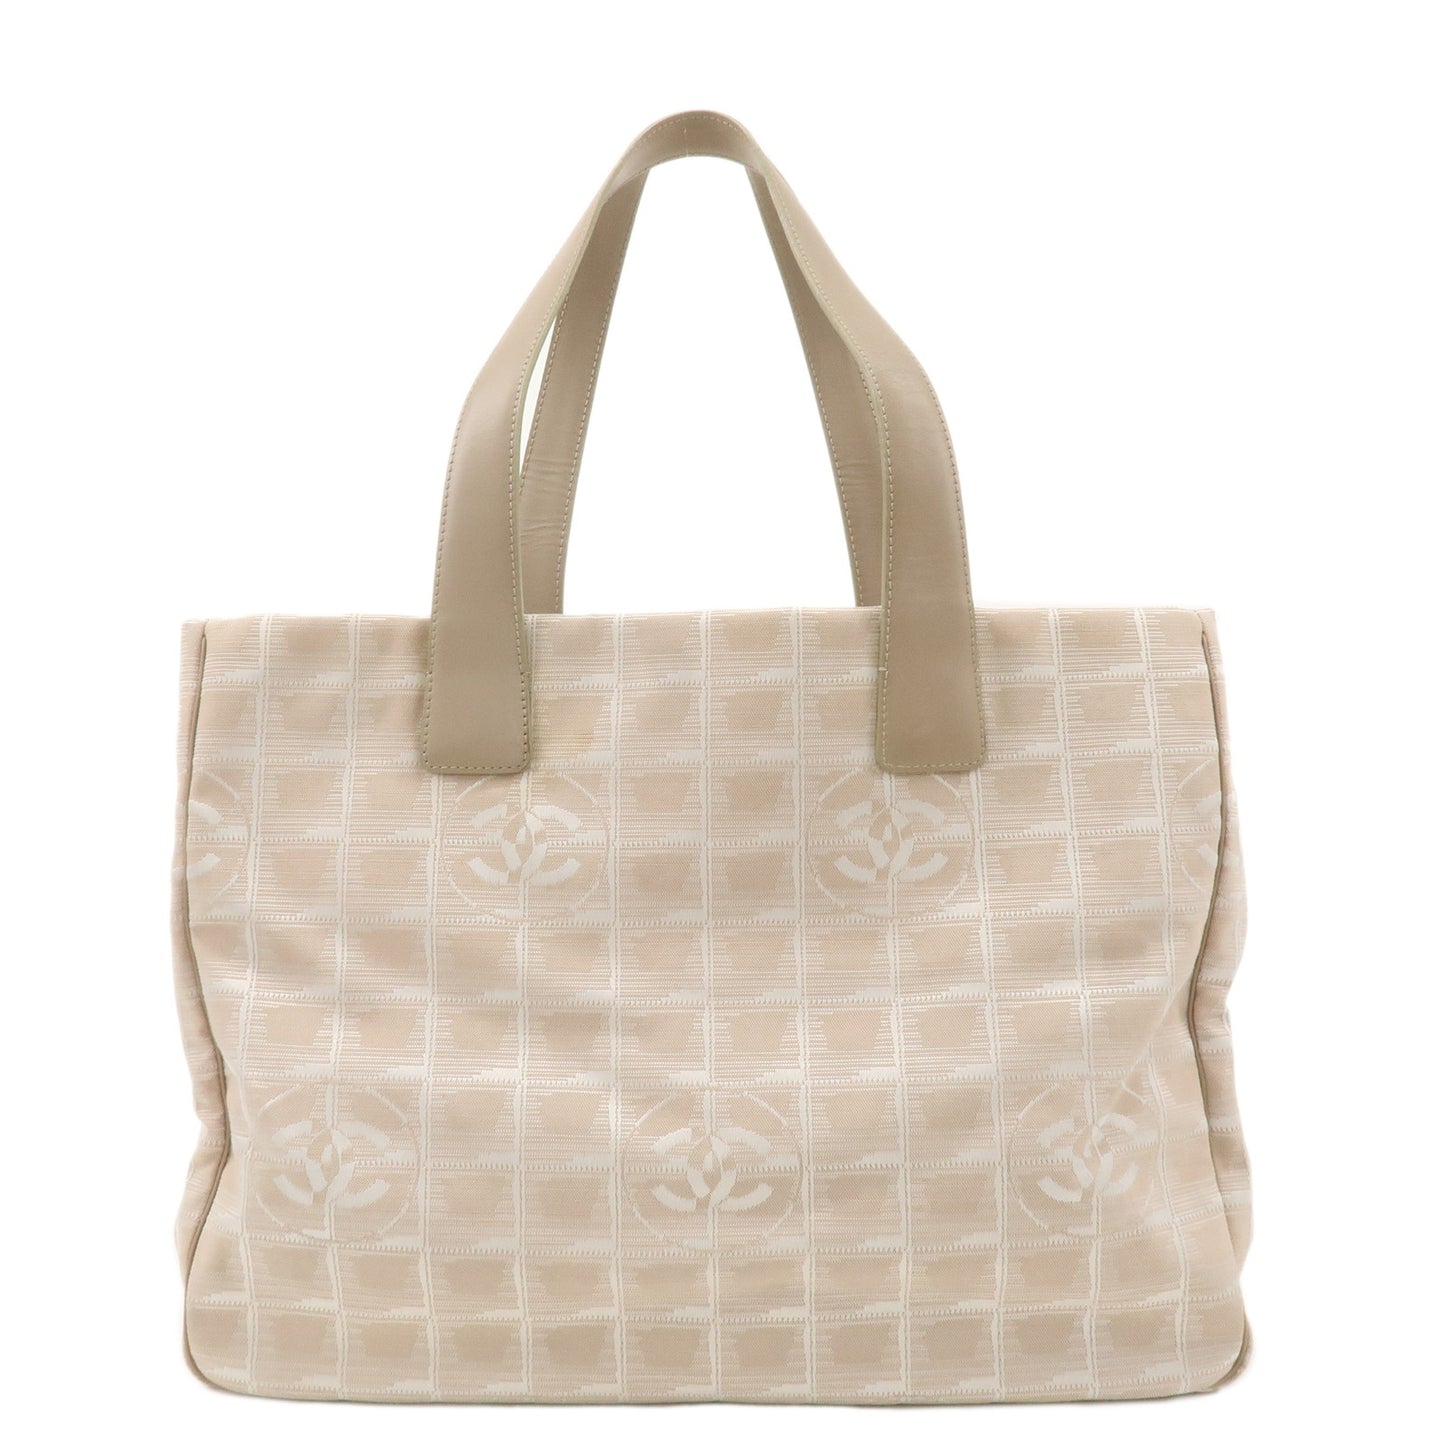 CHANEL-New-Travel-Line-Nylon-Jacquard-Leather-Tote-MM-Beige-A15991